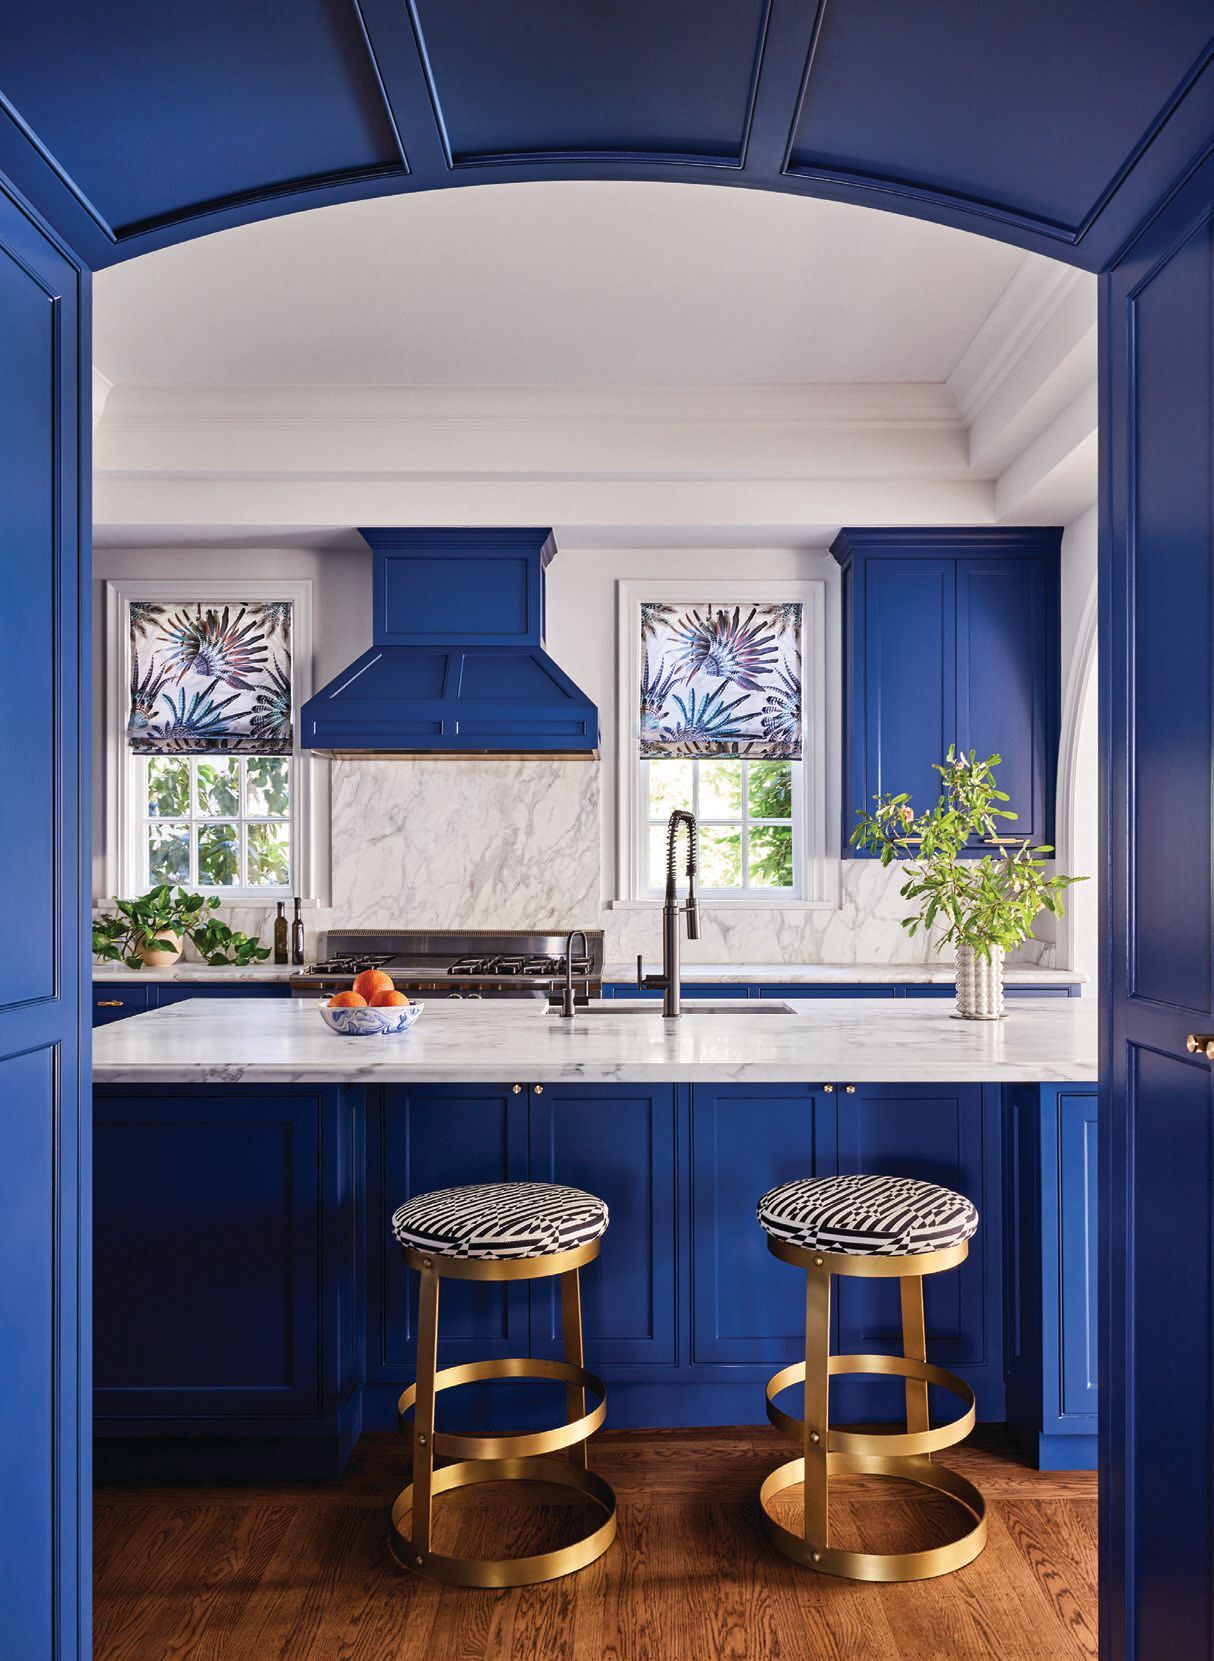 Cobalt blue defines the kitchen, which contrasts beautifully with the light-colored countertops. PHOTOGRAPHED BY NOE DEWITT